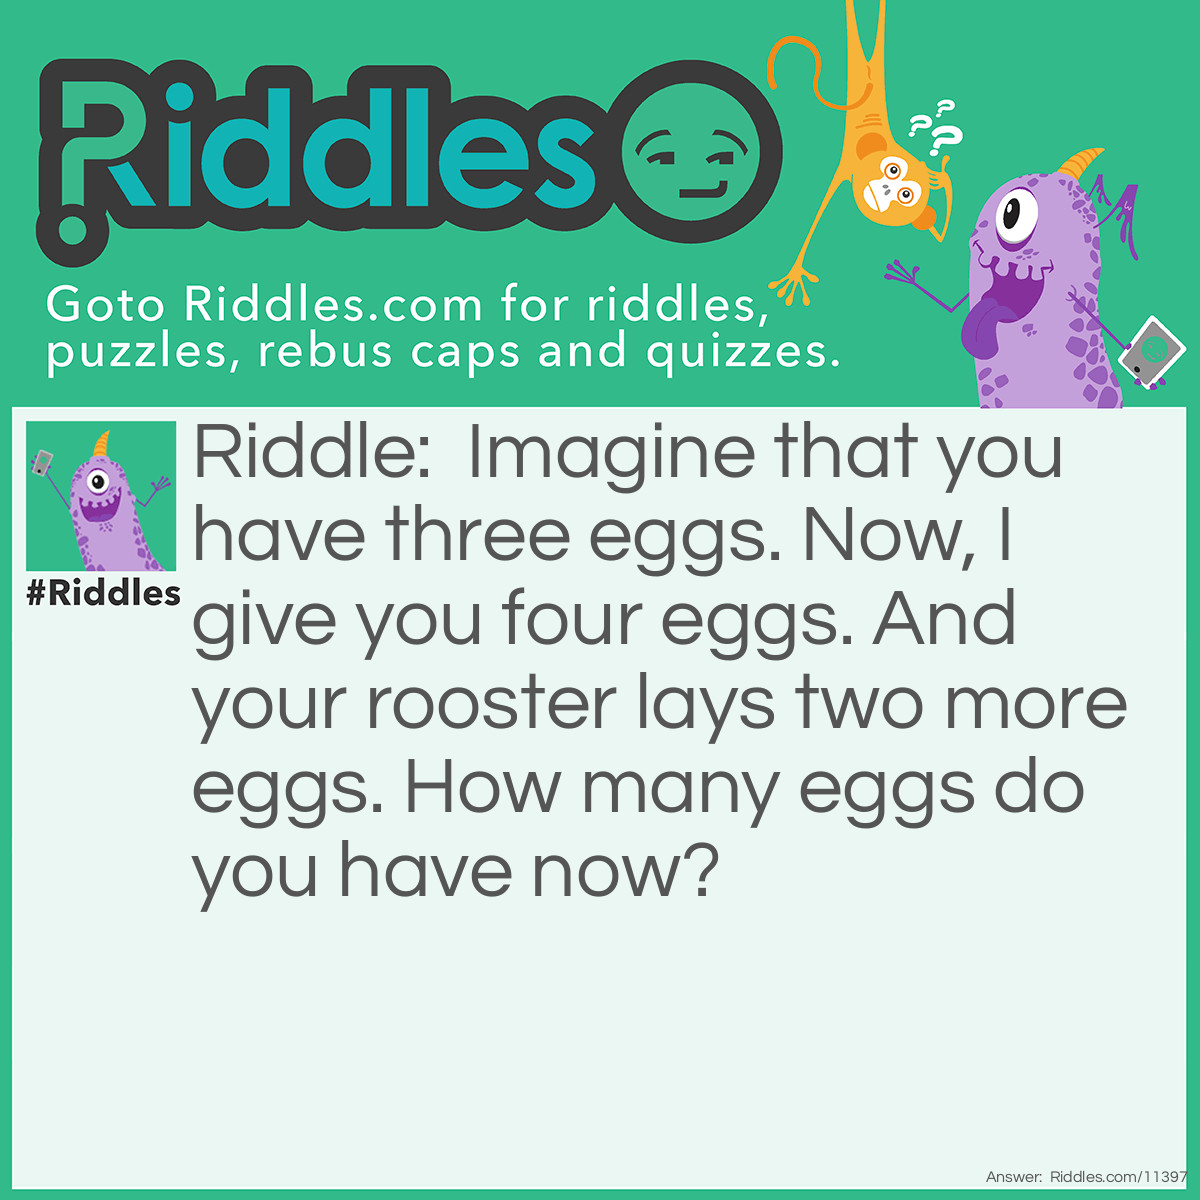 Riddle: Imagine that you have three eggs. Now, I give you four eggs. And your rooster lays two more eggs. How many eggs do you have now? Answer: You have four eggs–the ones I gave you. Those three eggs from the start don't count because they're imaginary (IMAGINE that you have three eggs). And those two eggs your rooster lays don't count either because roosters don't lay eggs.